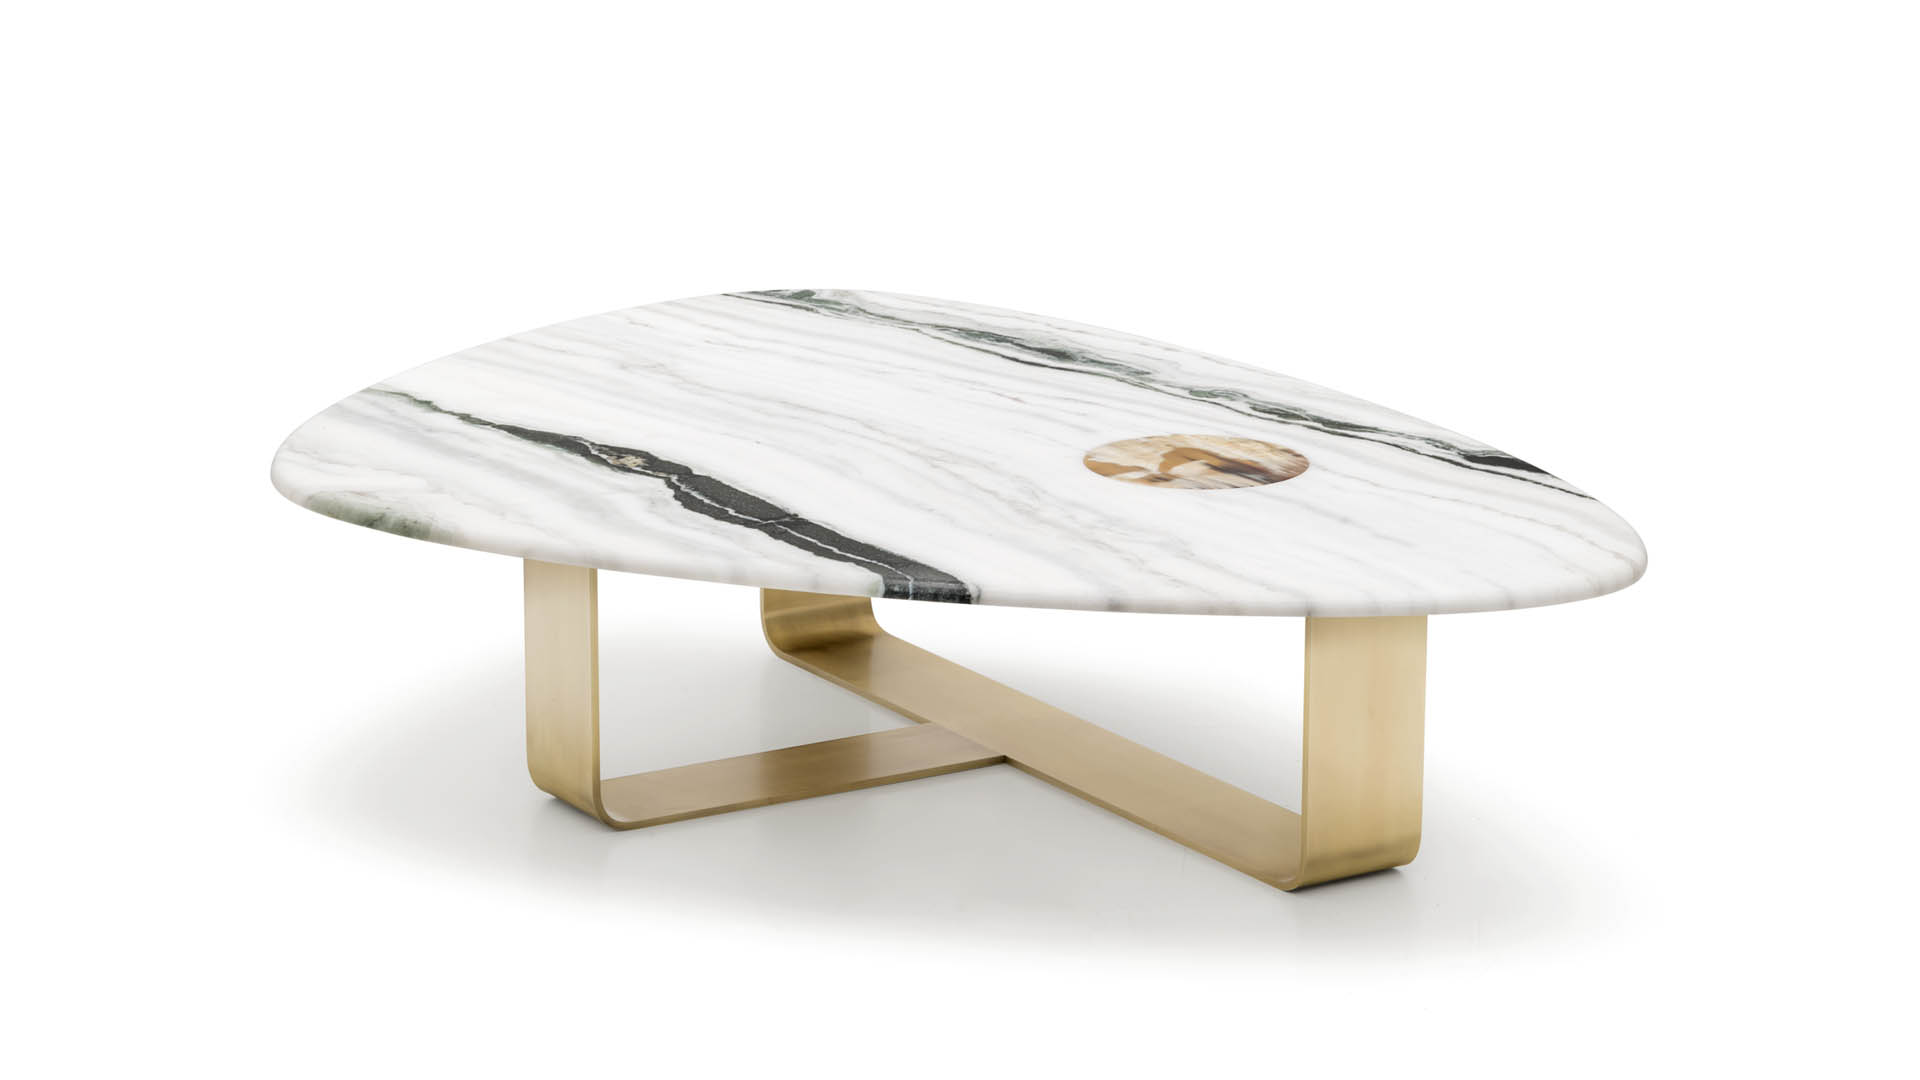 Tables and console tables - Demetra coffee table in Dalmata marble and horn - still life - Arcahorn